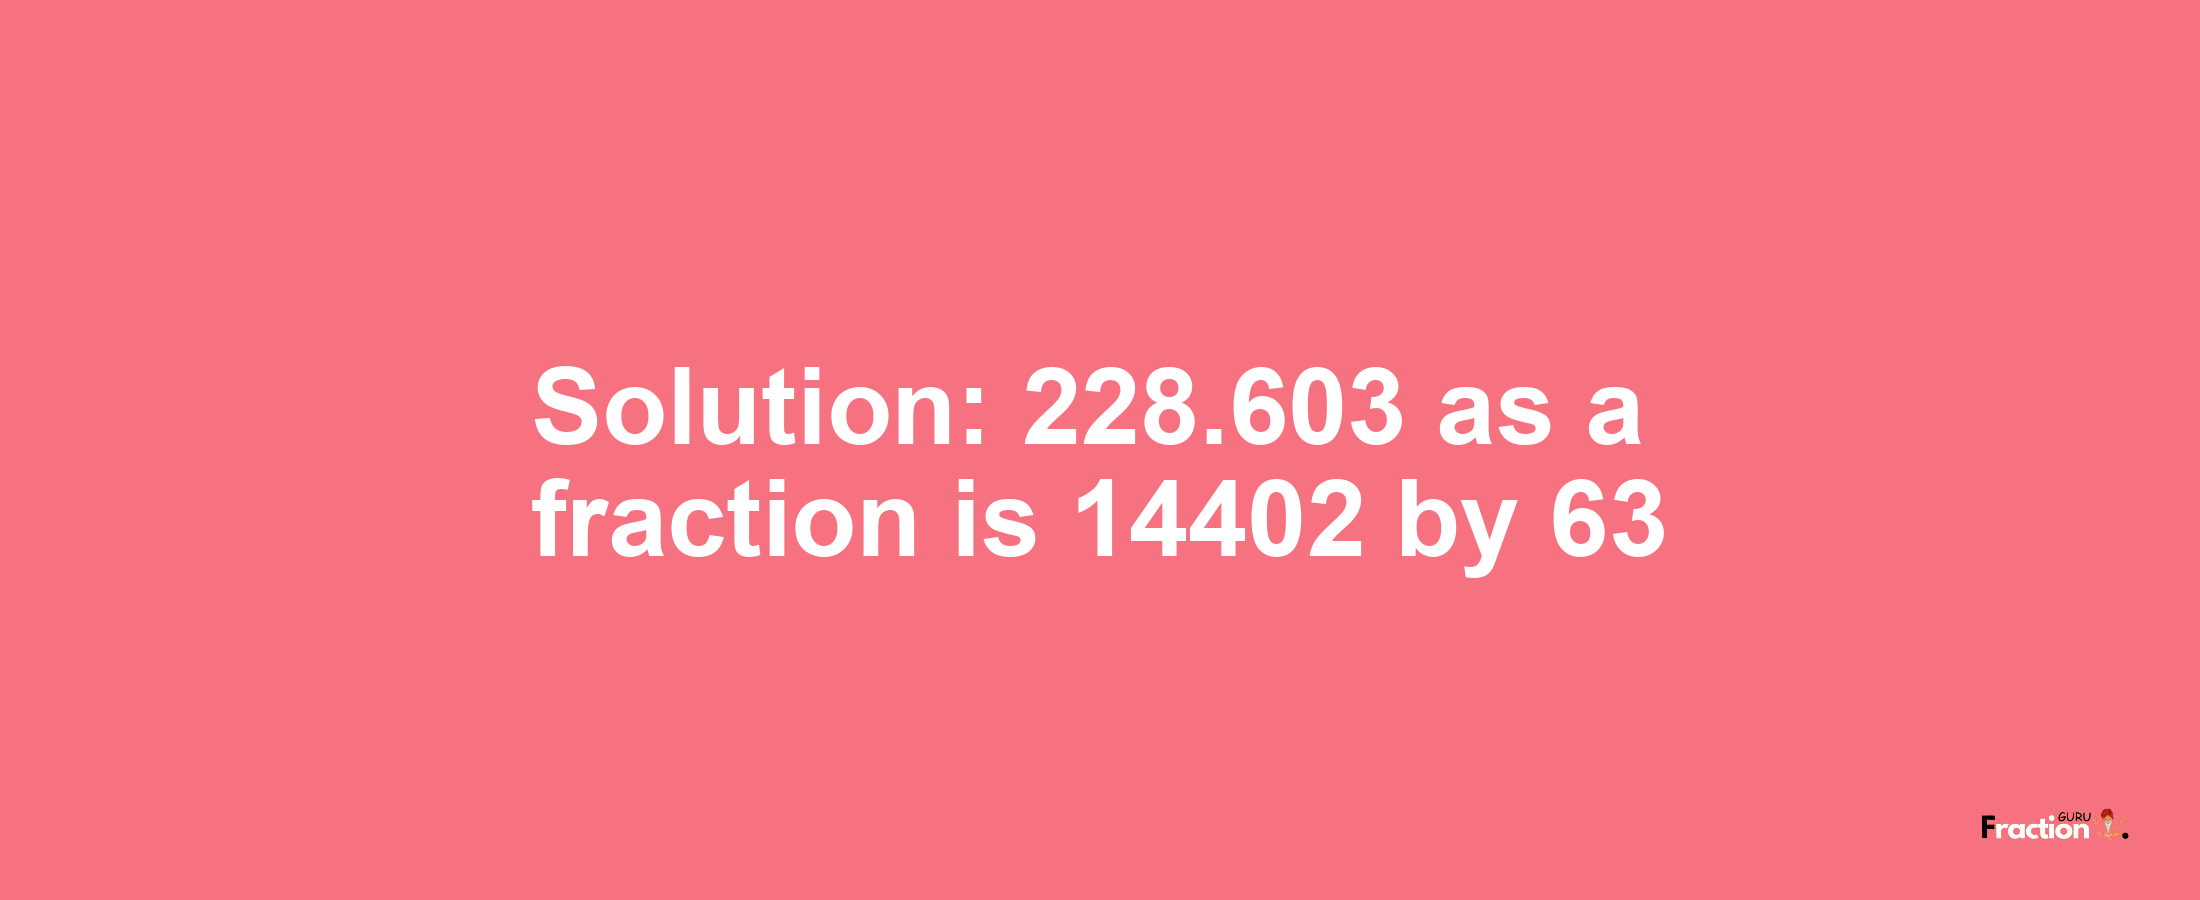 Solution:228.603 as a fraction is 14402/63